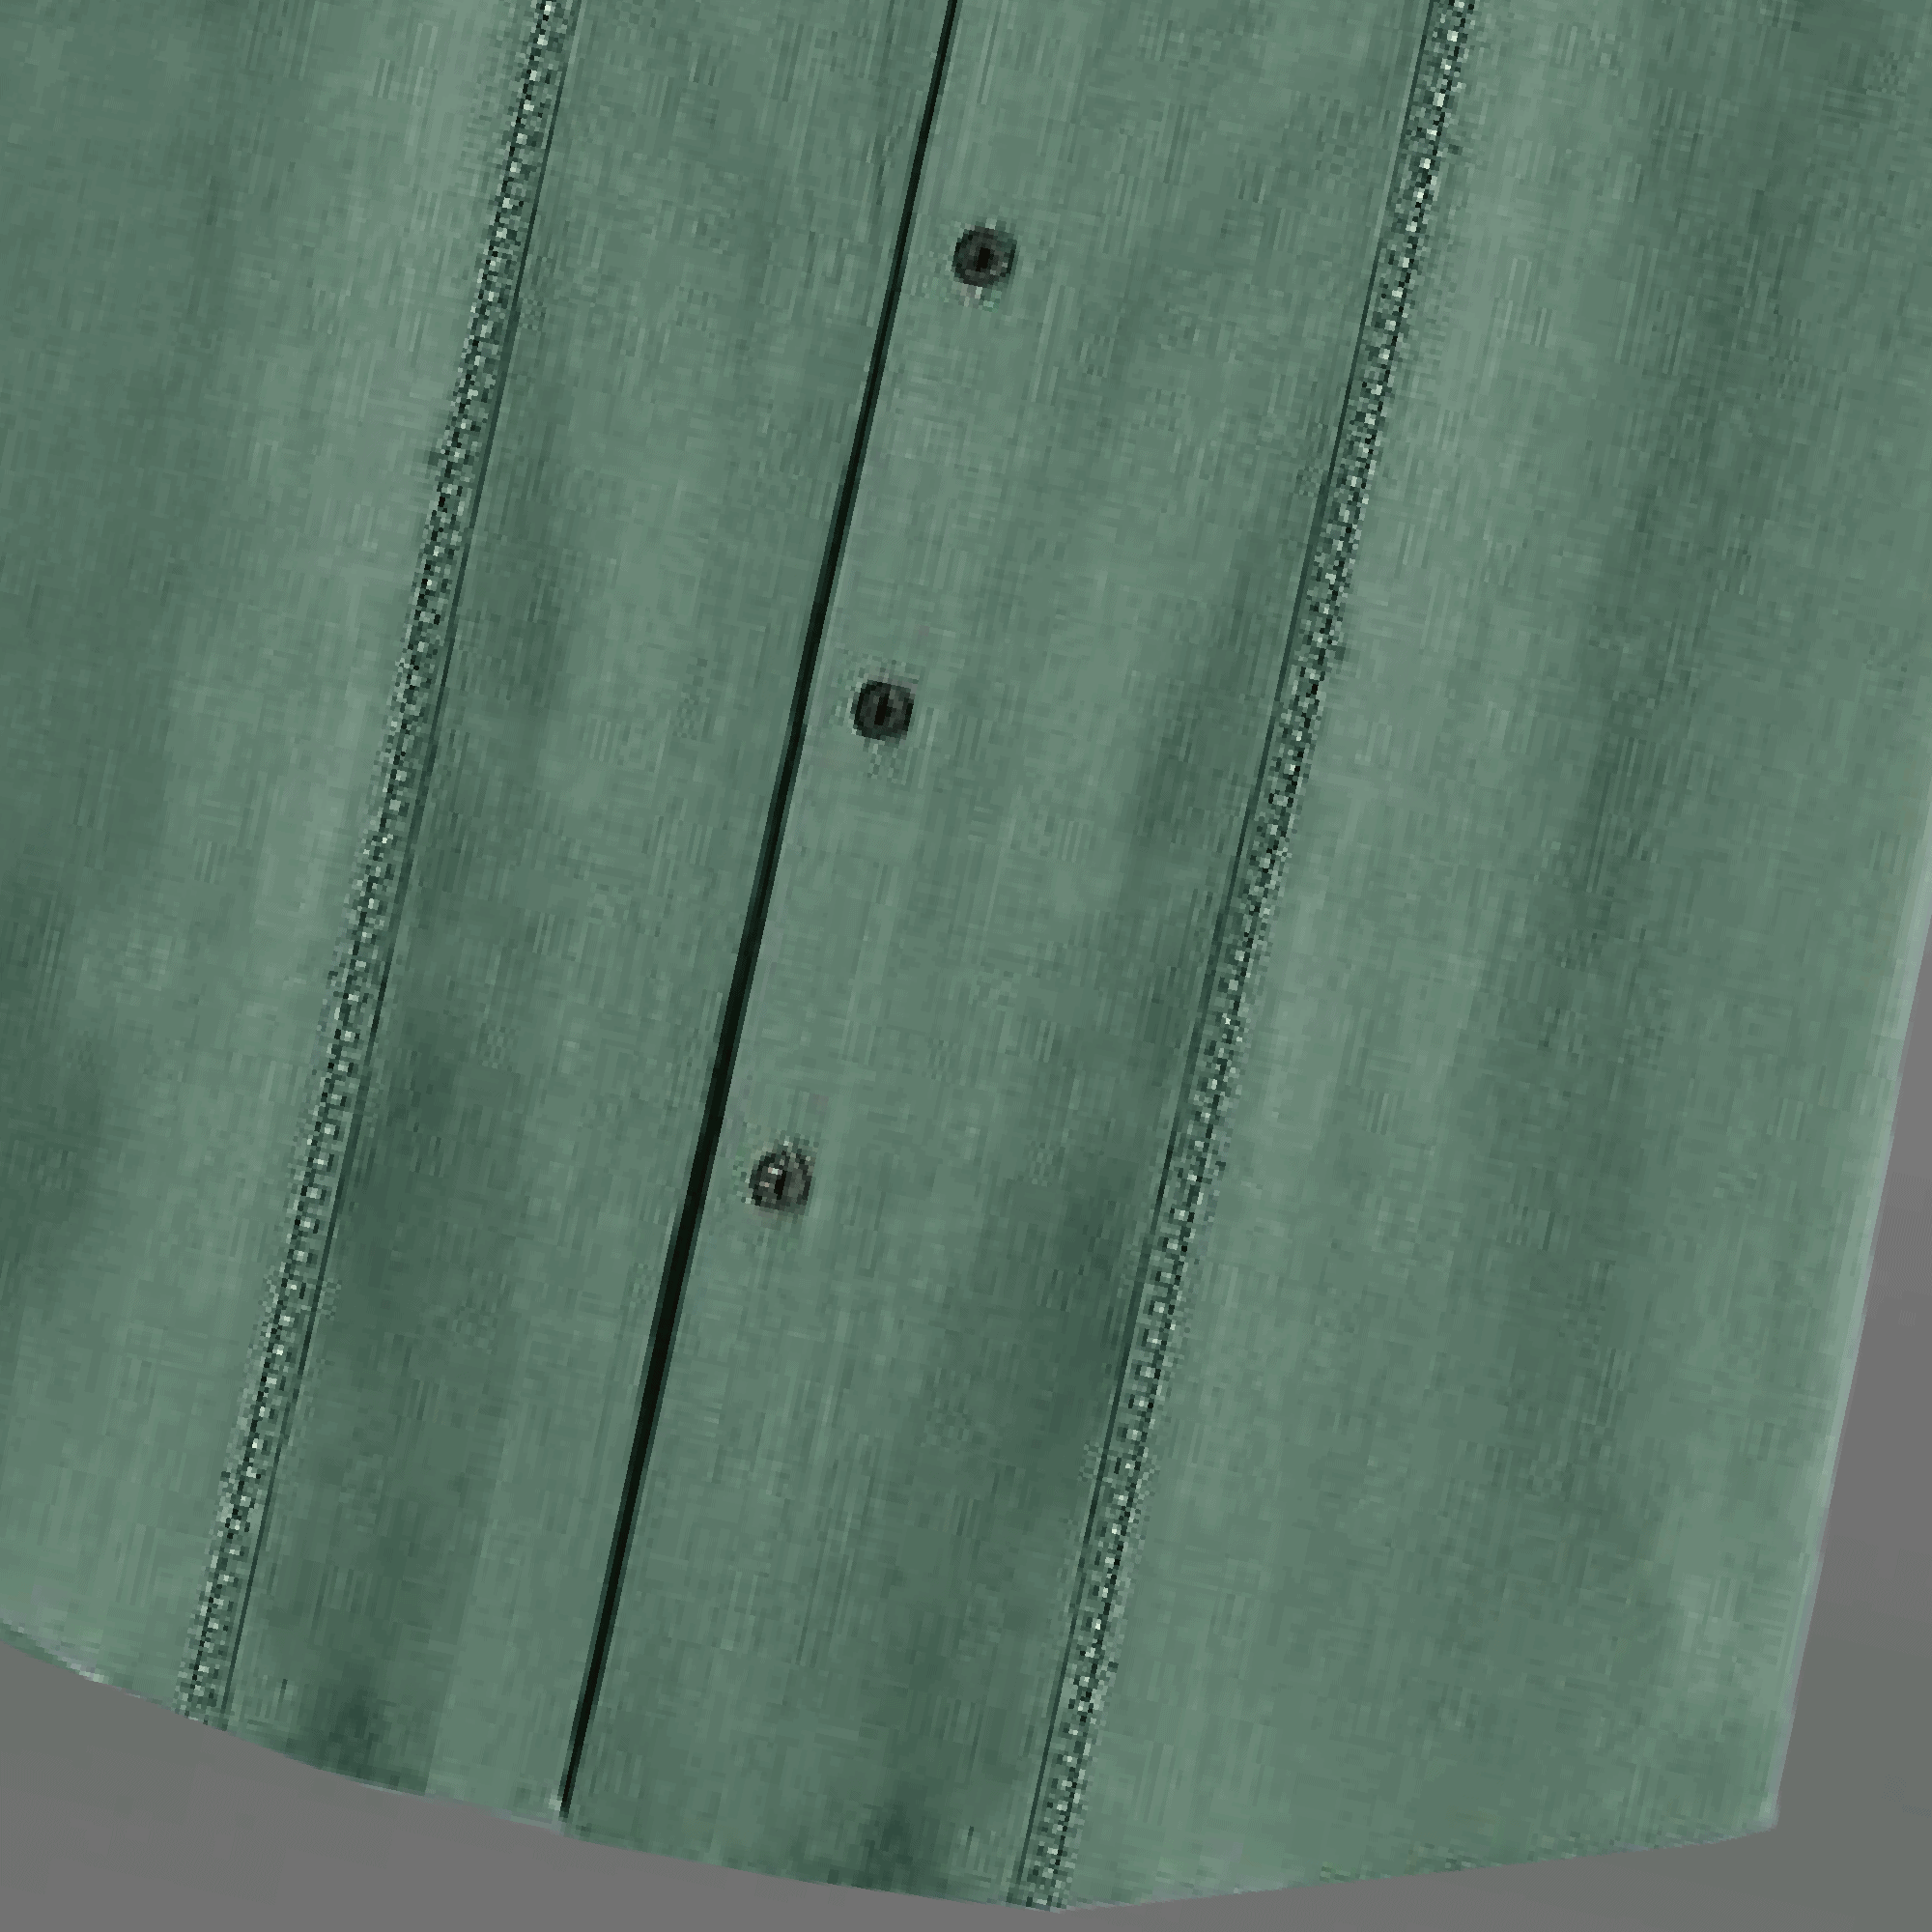 Men's Green Half Sleeve Shirt with Lace work and double side pocket-RMS040